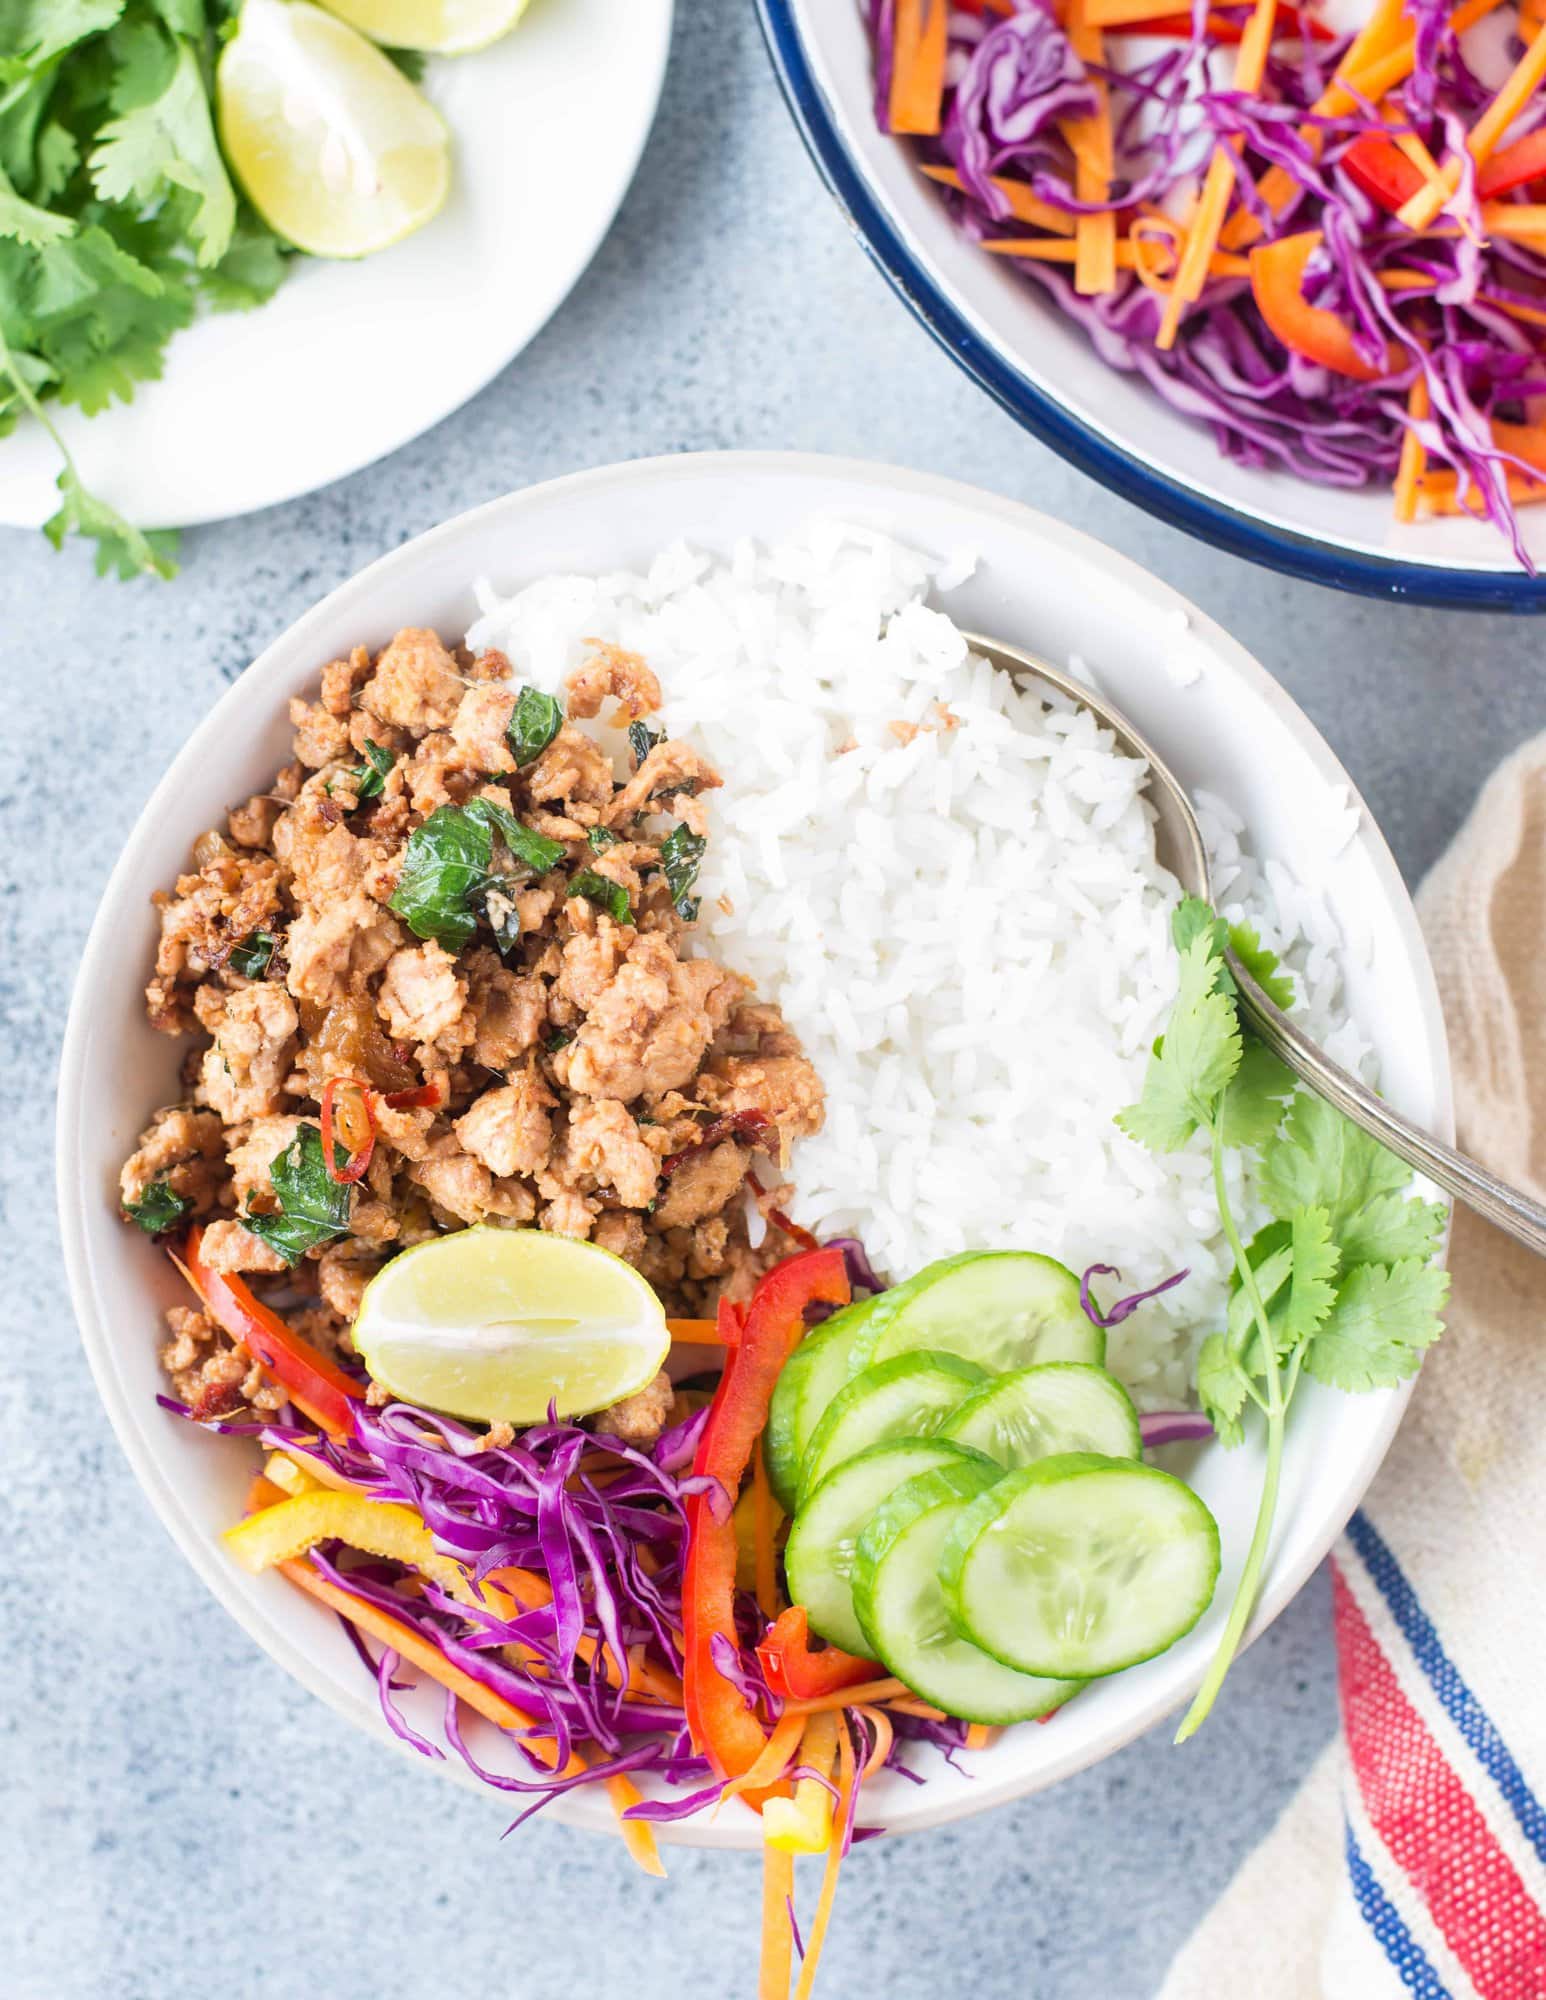 Thai Basil Chicken, this stir fry is spicy, flavourful with real Thai flavour from Thai basil and takes only 15 minutes to make. Serve it with a bowl of jasmine rice and a fried egg or fresh salad.